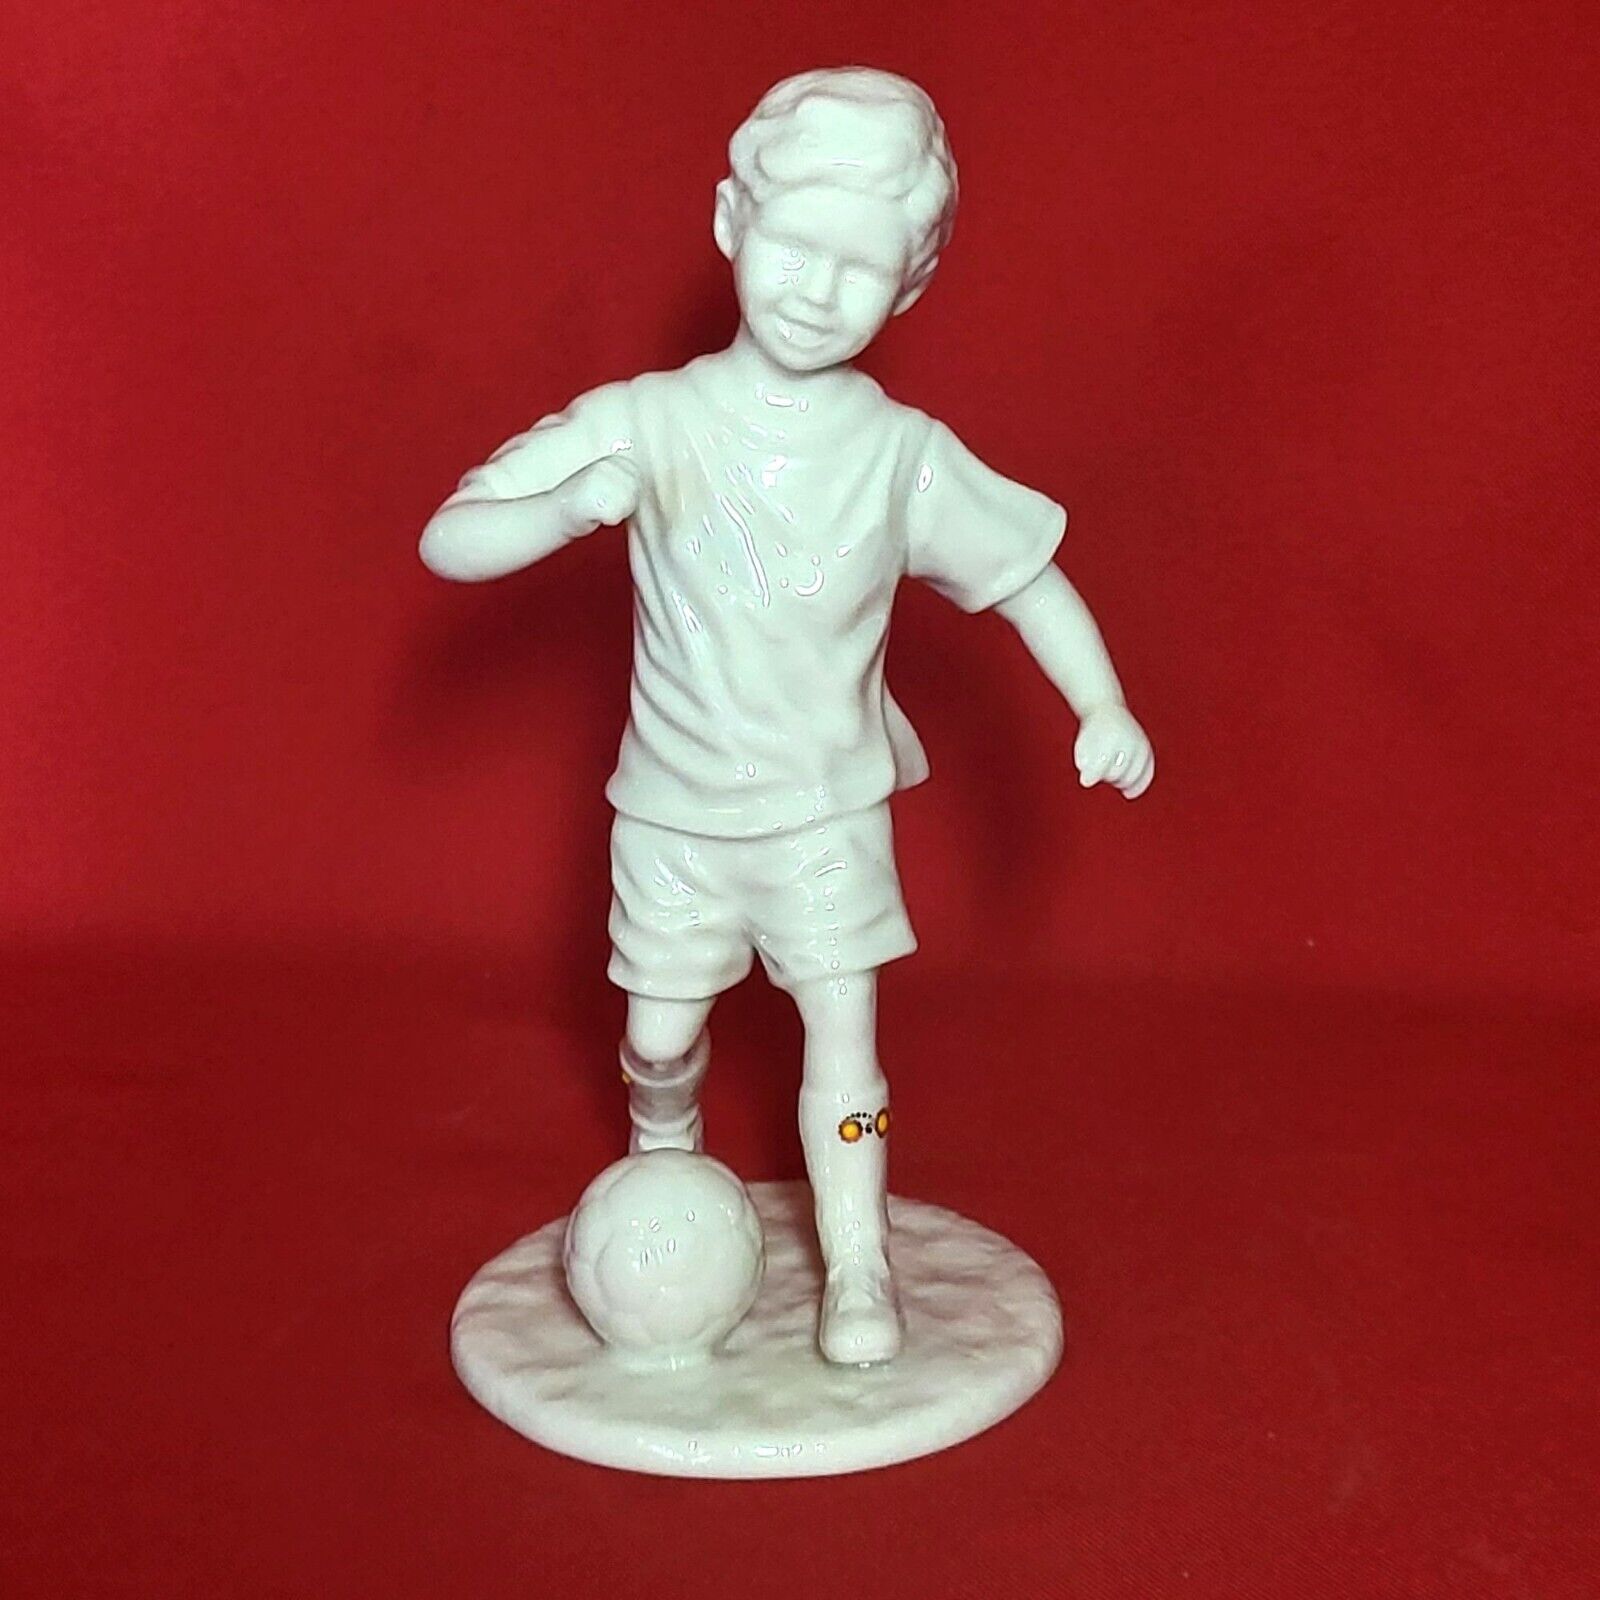 Lenox China Jewels Collection Boy Playing Soccer Sure Shot Figurine 1995